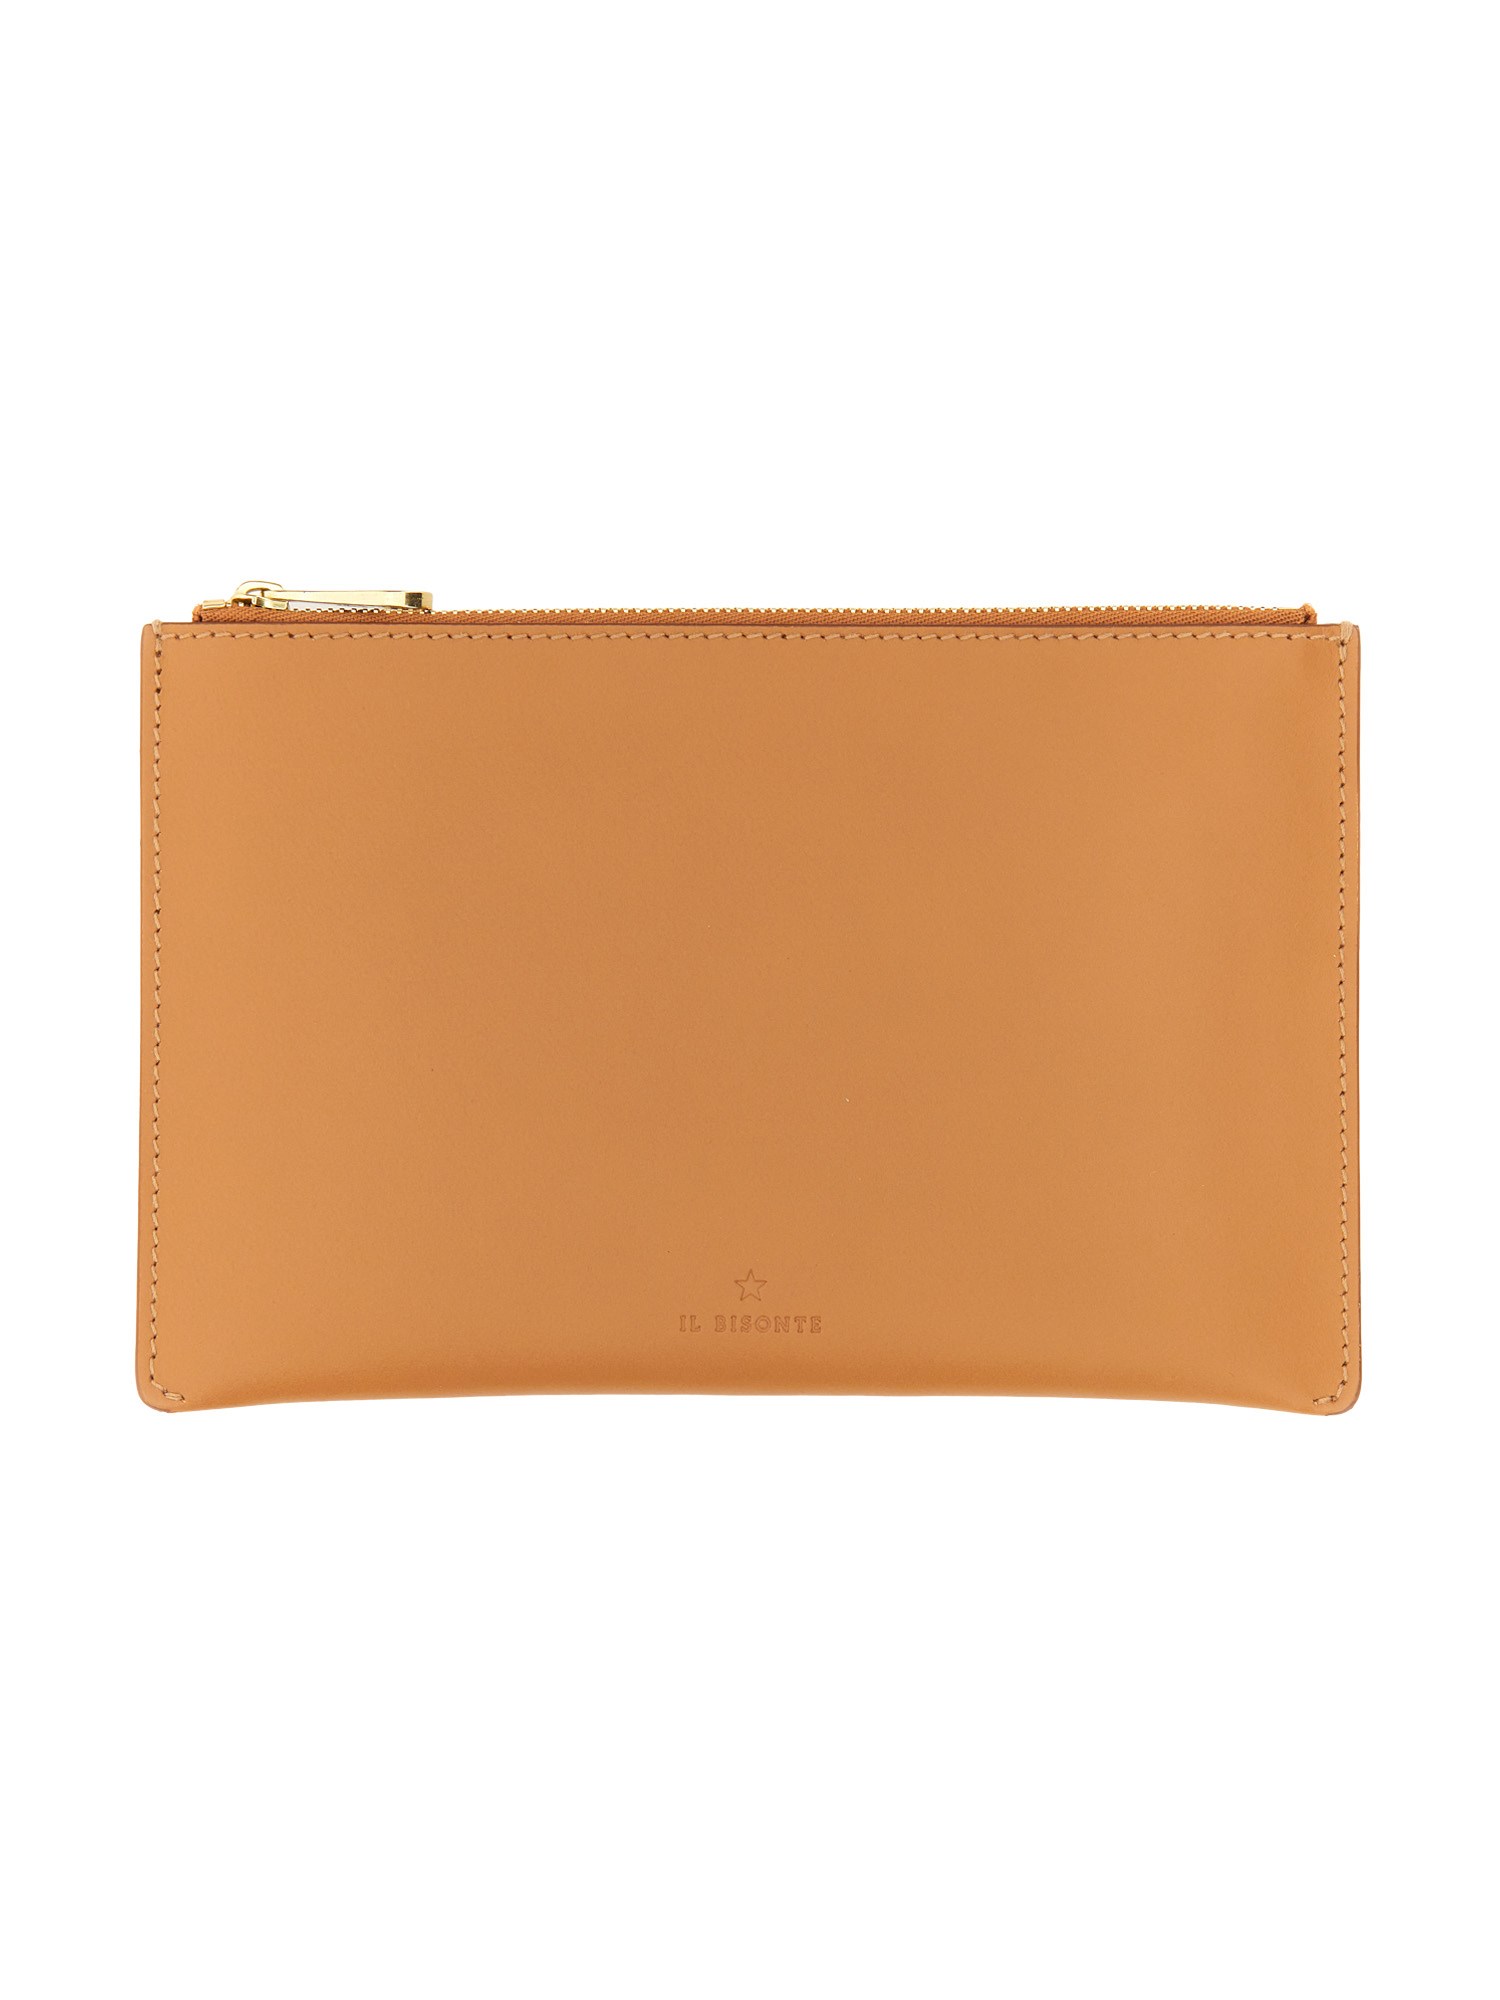 Il Bisonte Leather Case In Light Brown